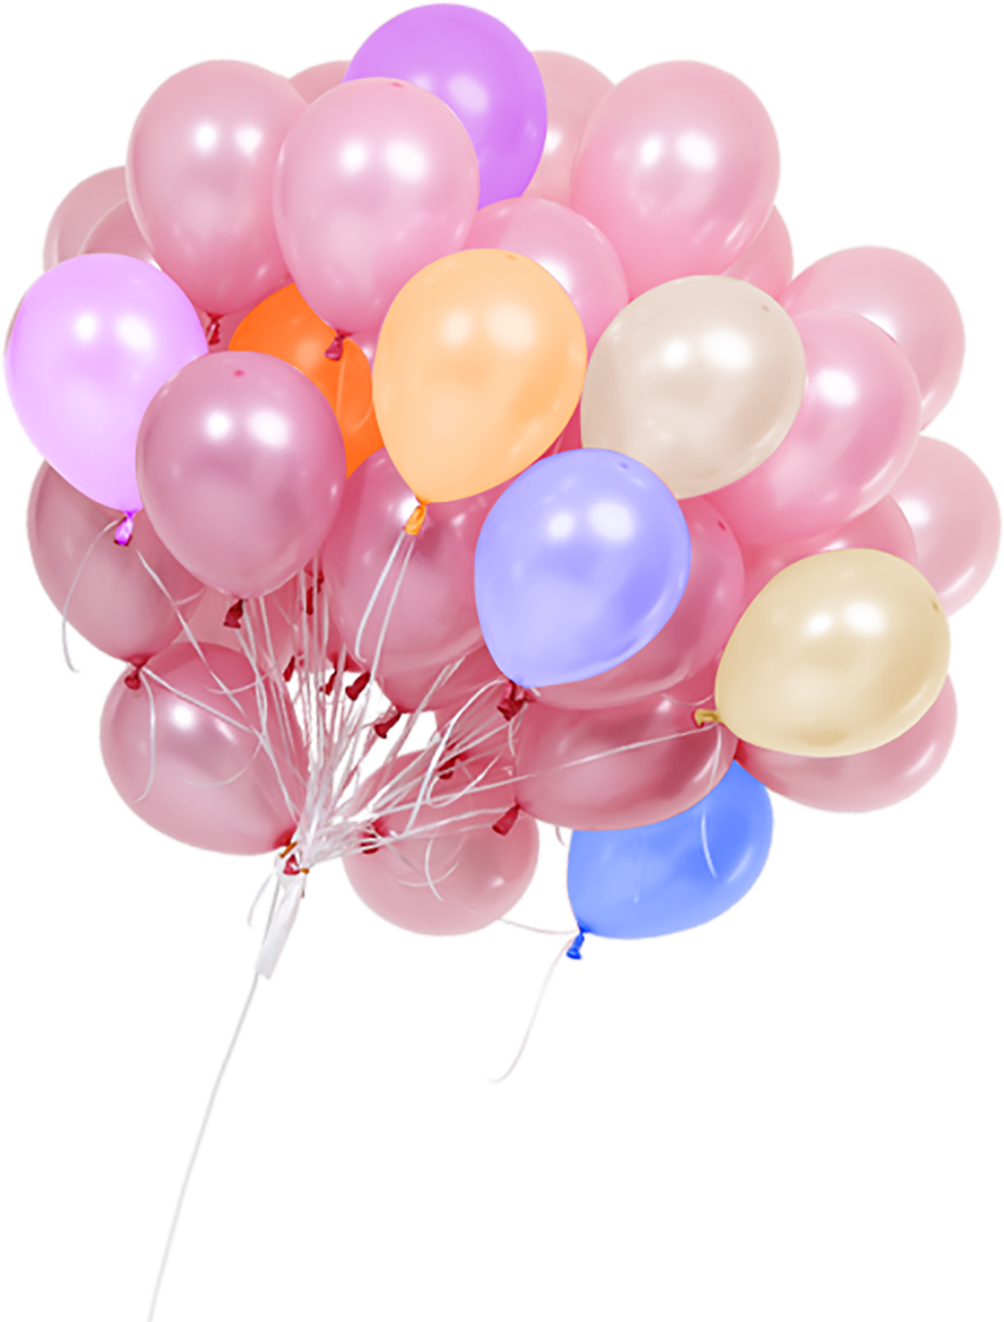 Download Free Pink Of Balloons Bunch Free Clipart HQ ICON favicon ...